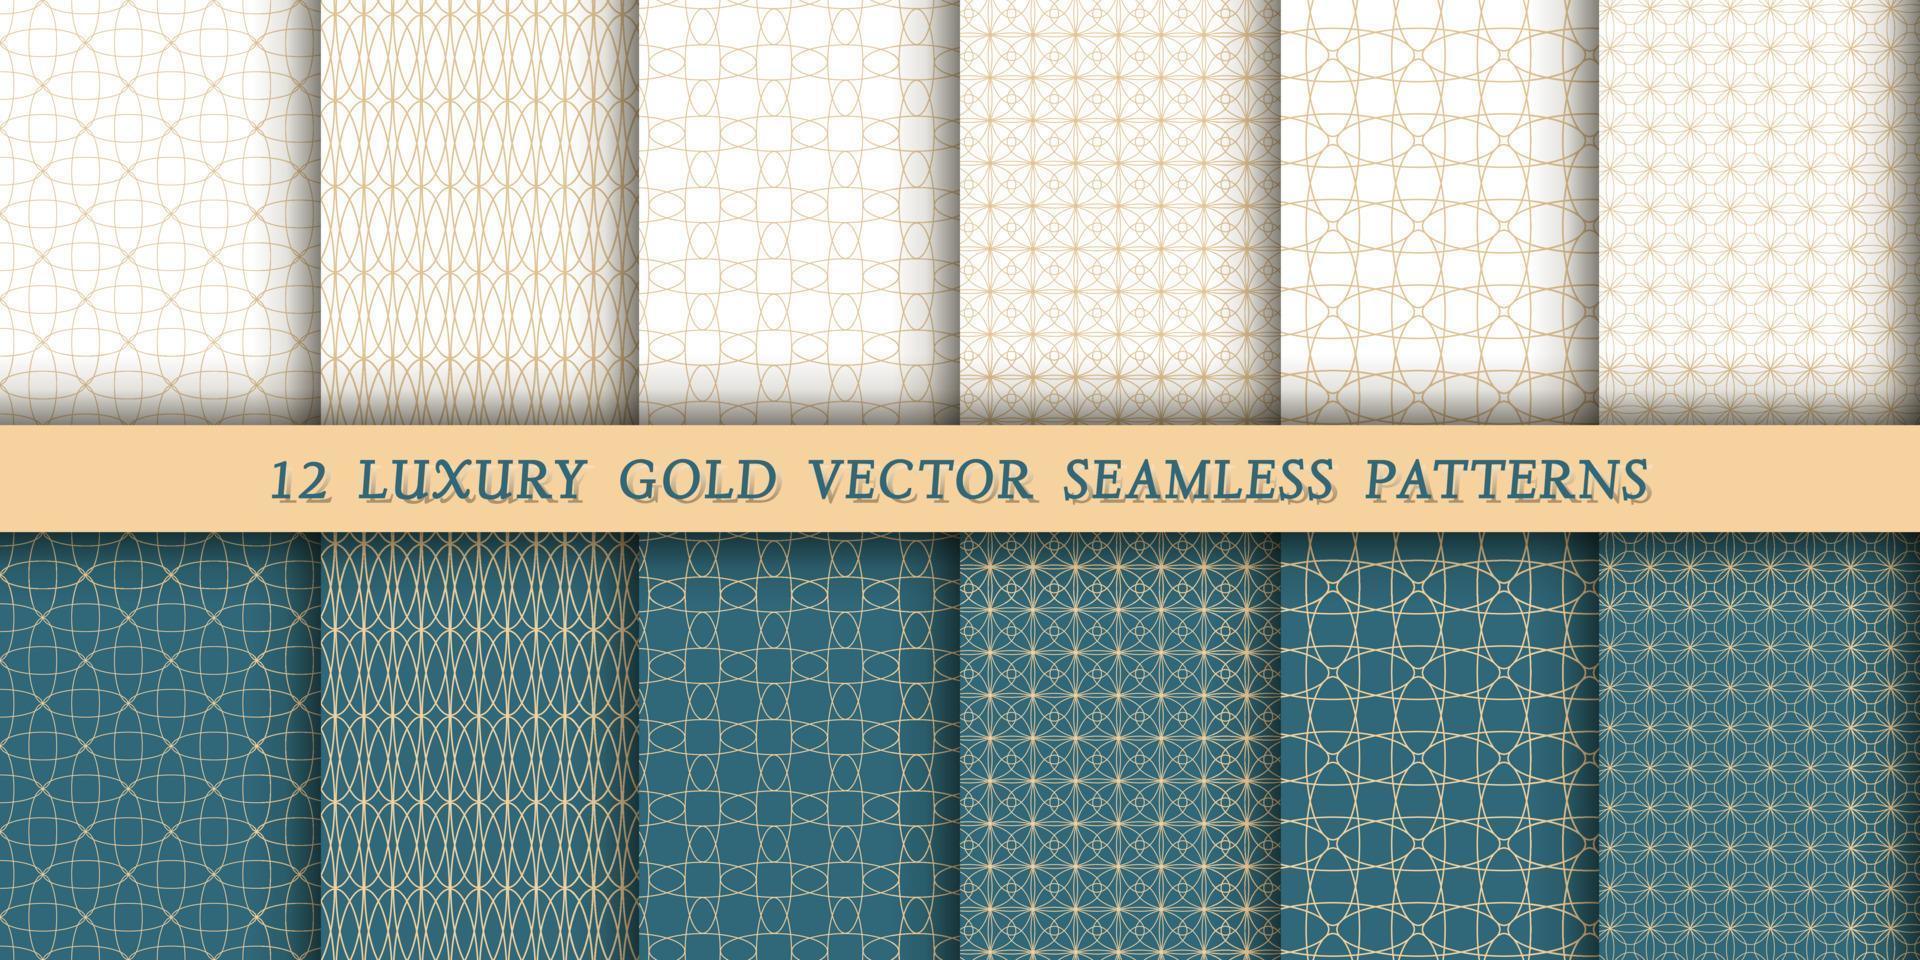 A set of 12 luxurious geometric gold patterns for printing and design, golden lines on a white and green, emerald background. Modern and stylish patterns vector